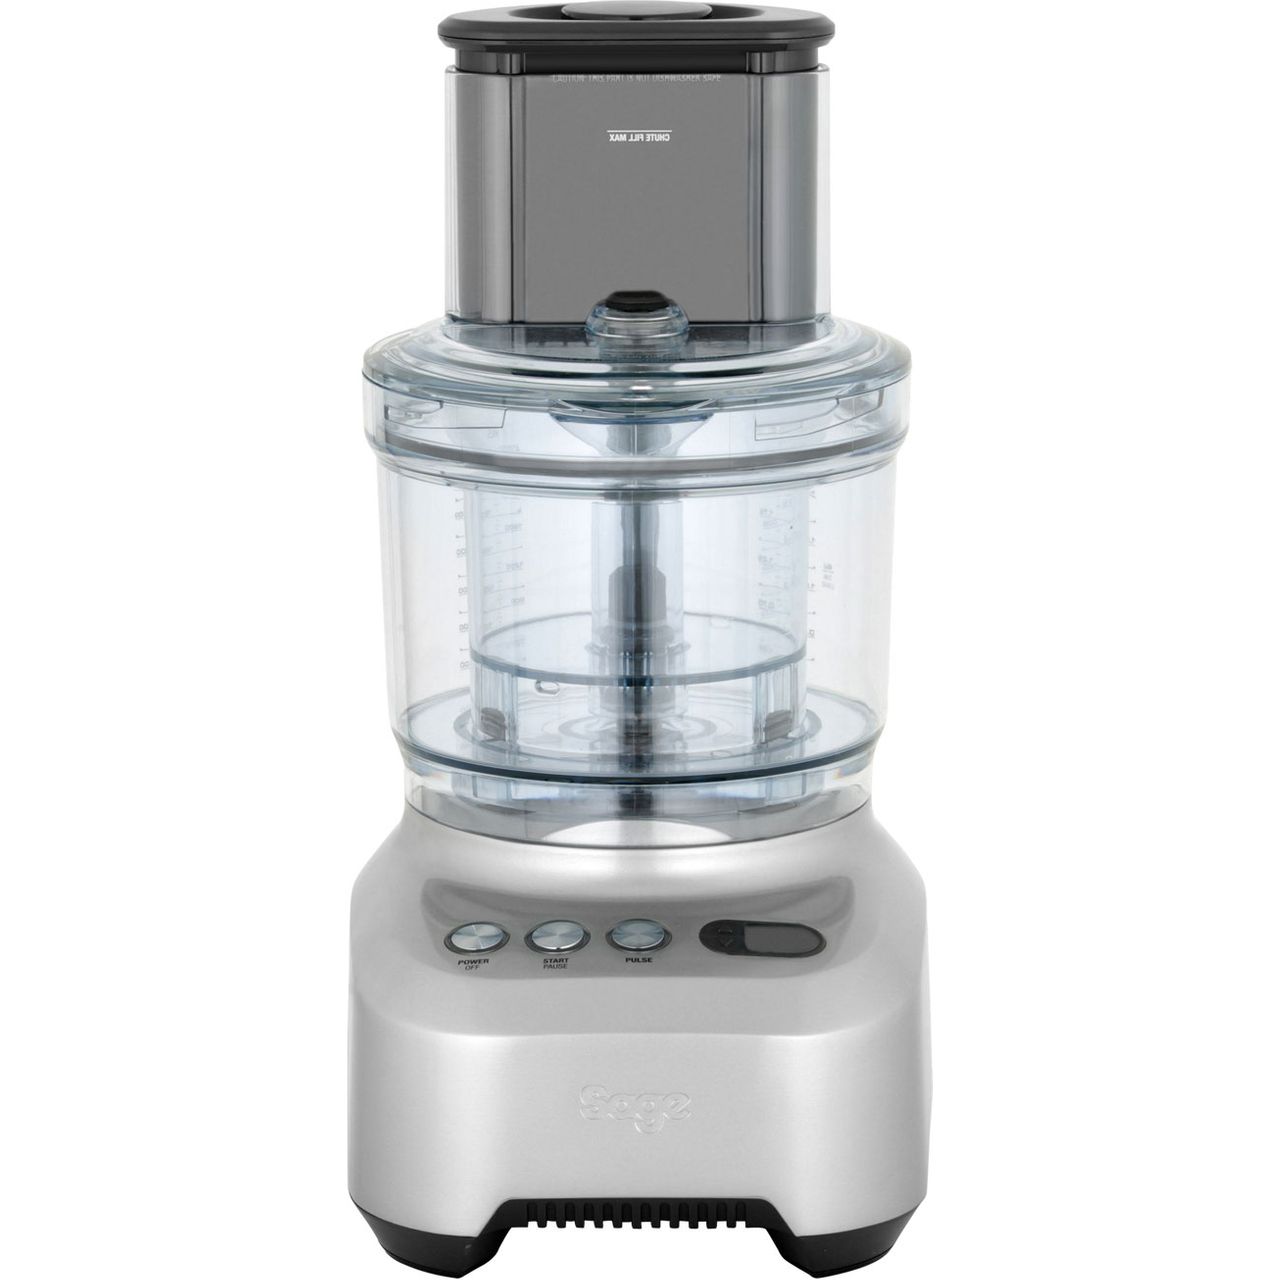 Sage The Kitchen Wizz Pro BFP800UK Food Processor With 8 Accessories Review